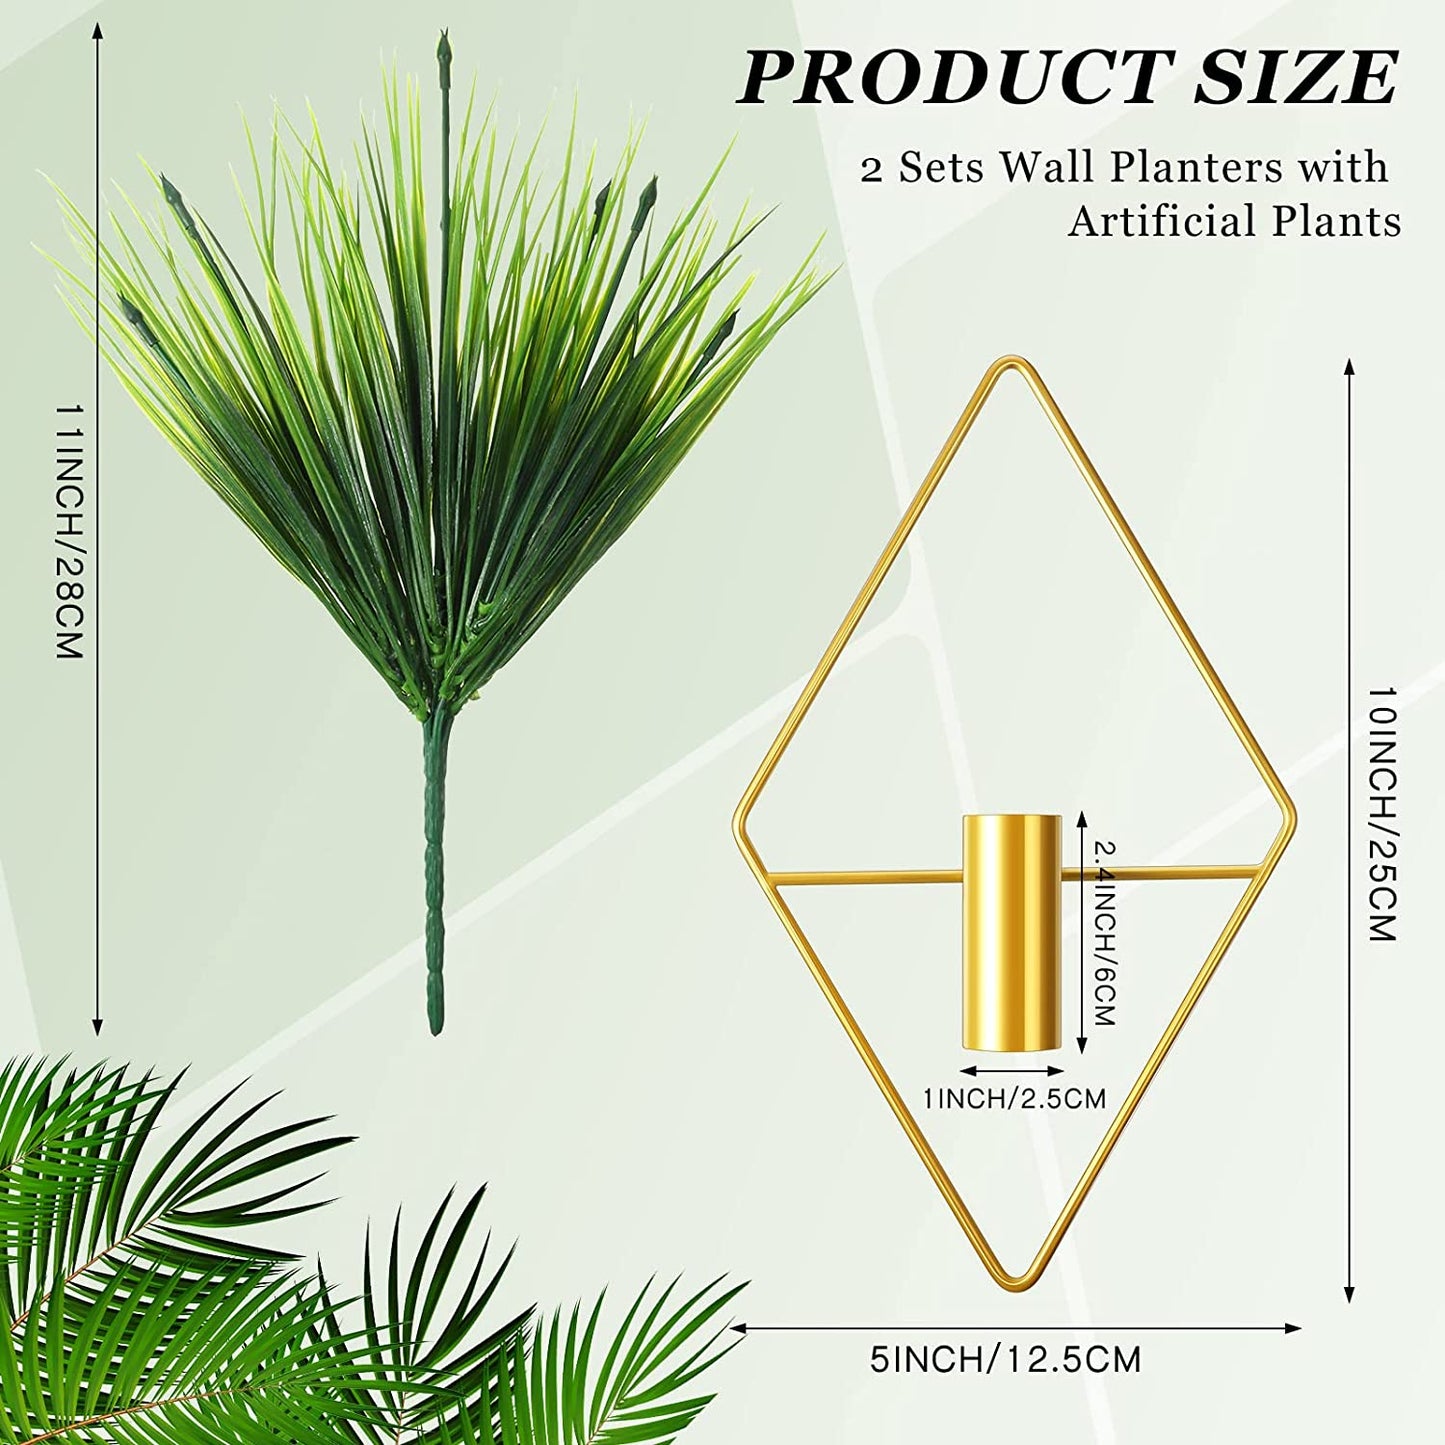 2 Pieces Diamond Shape Hanging Planters with Artificial Aquatic Plants Metal Hanging Vase Indoor Plants Holder Modern Geometric Wall Decor for Home Living Room Office (Gold, Aquatic Plant)